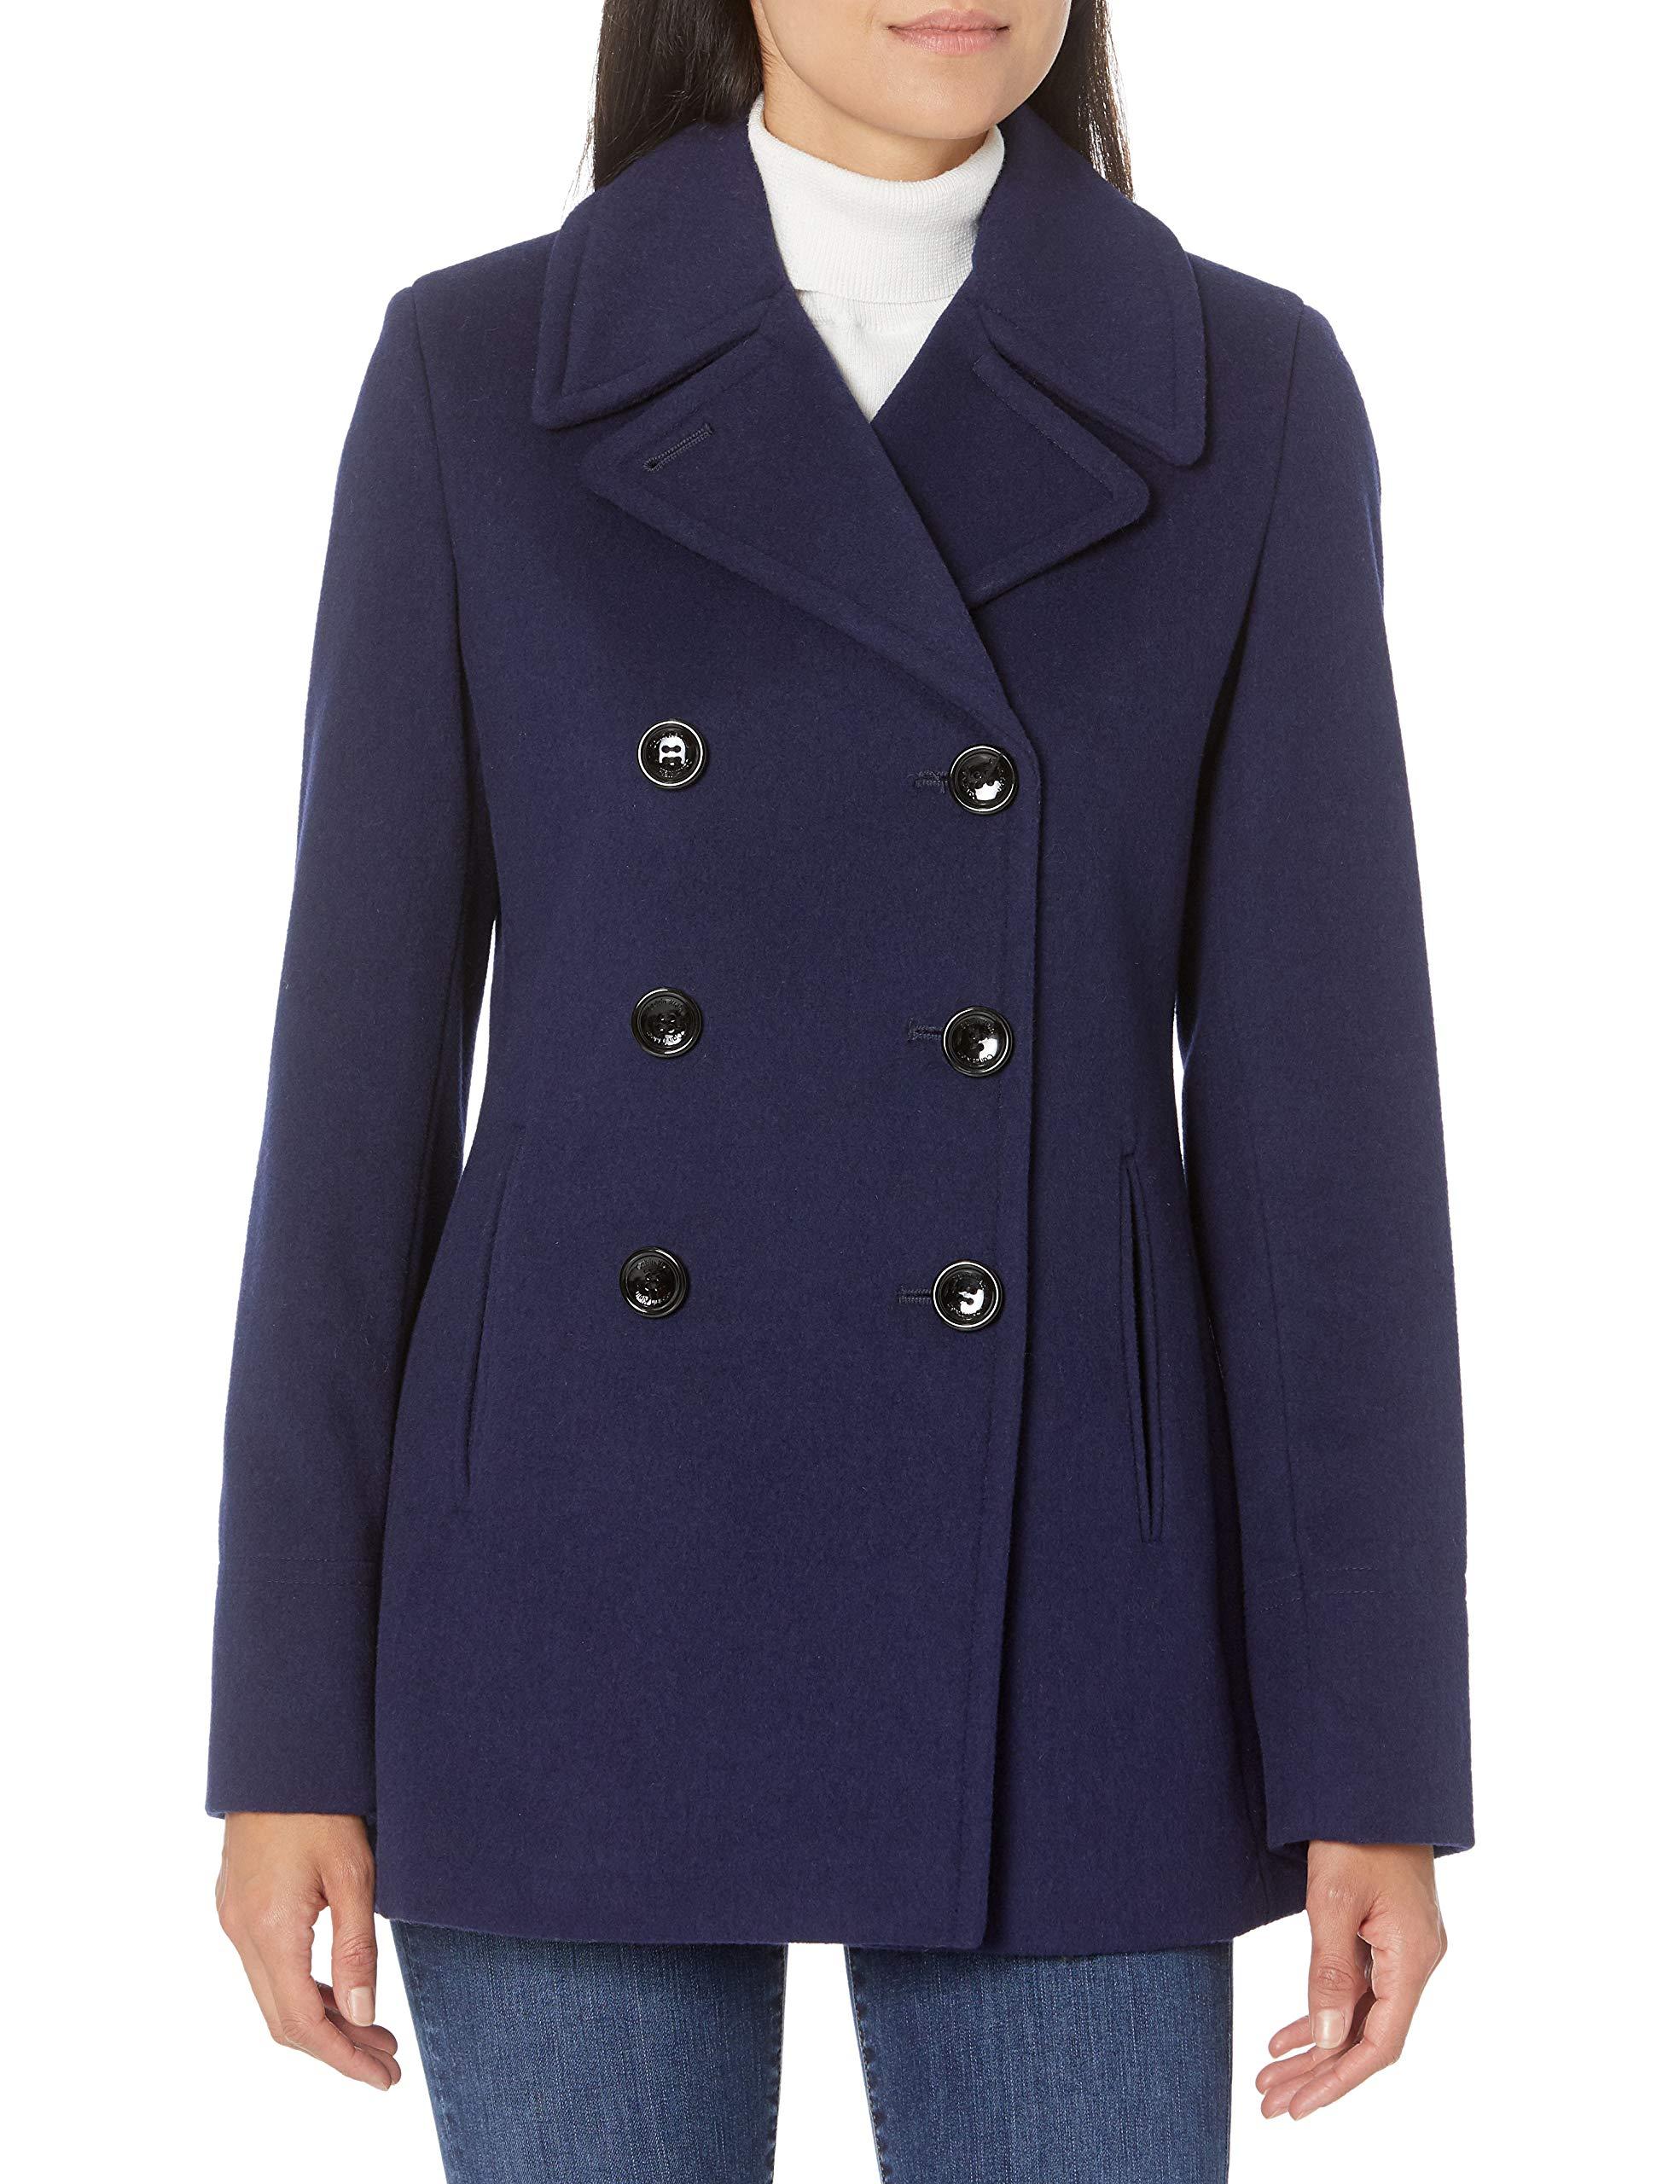 Calvin Klein S Double Breasted Peacoat in Blue - Lyst